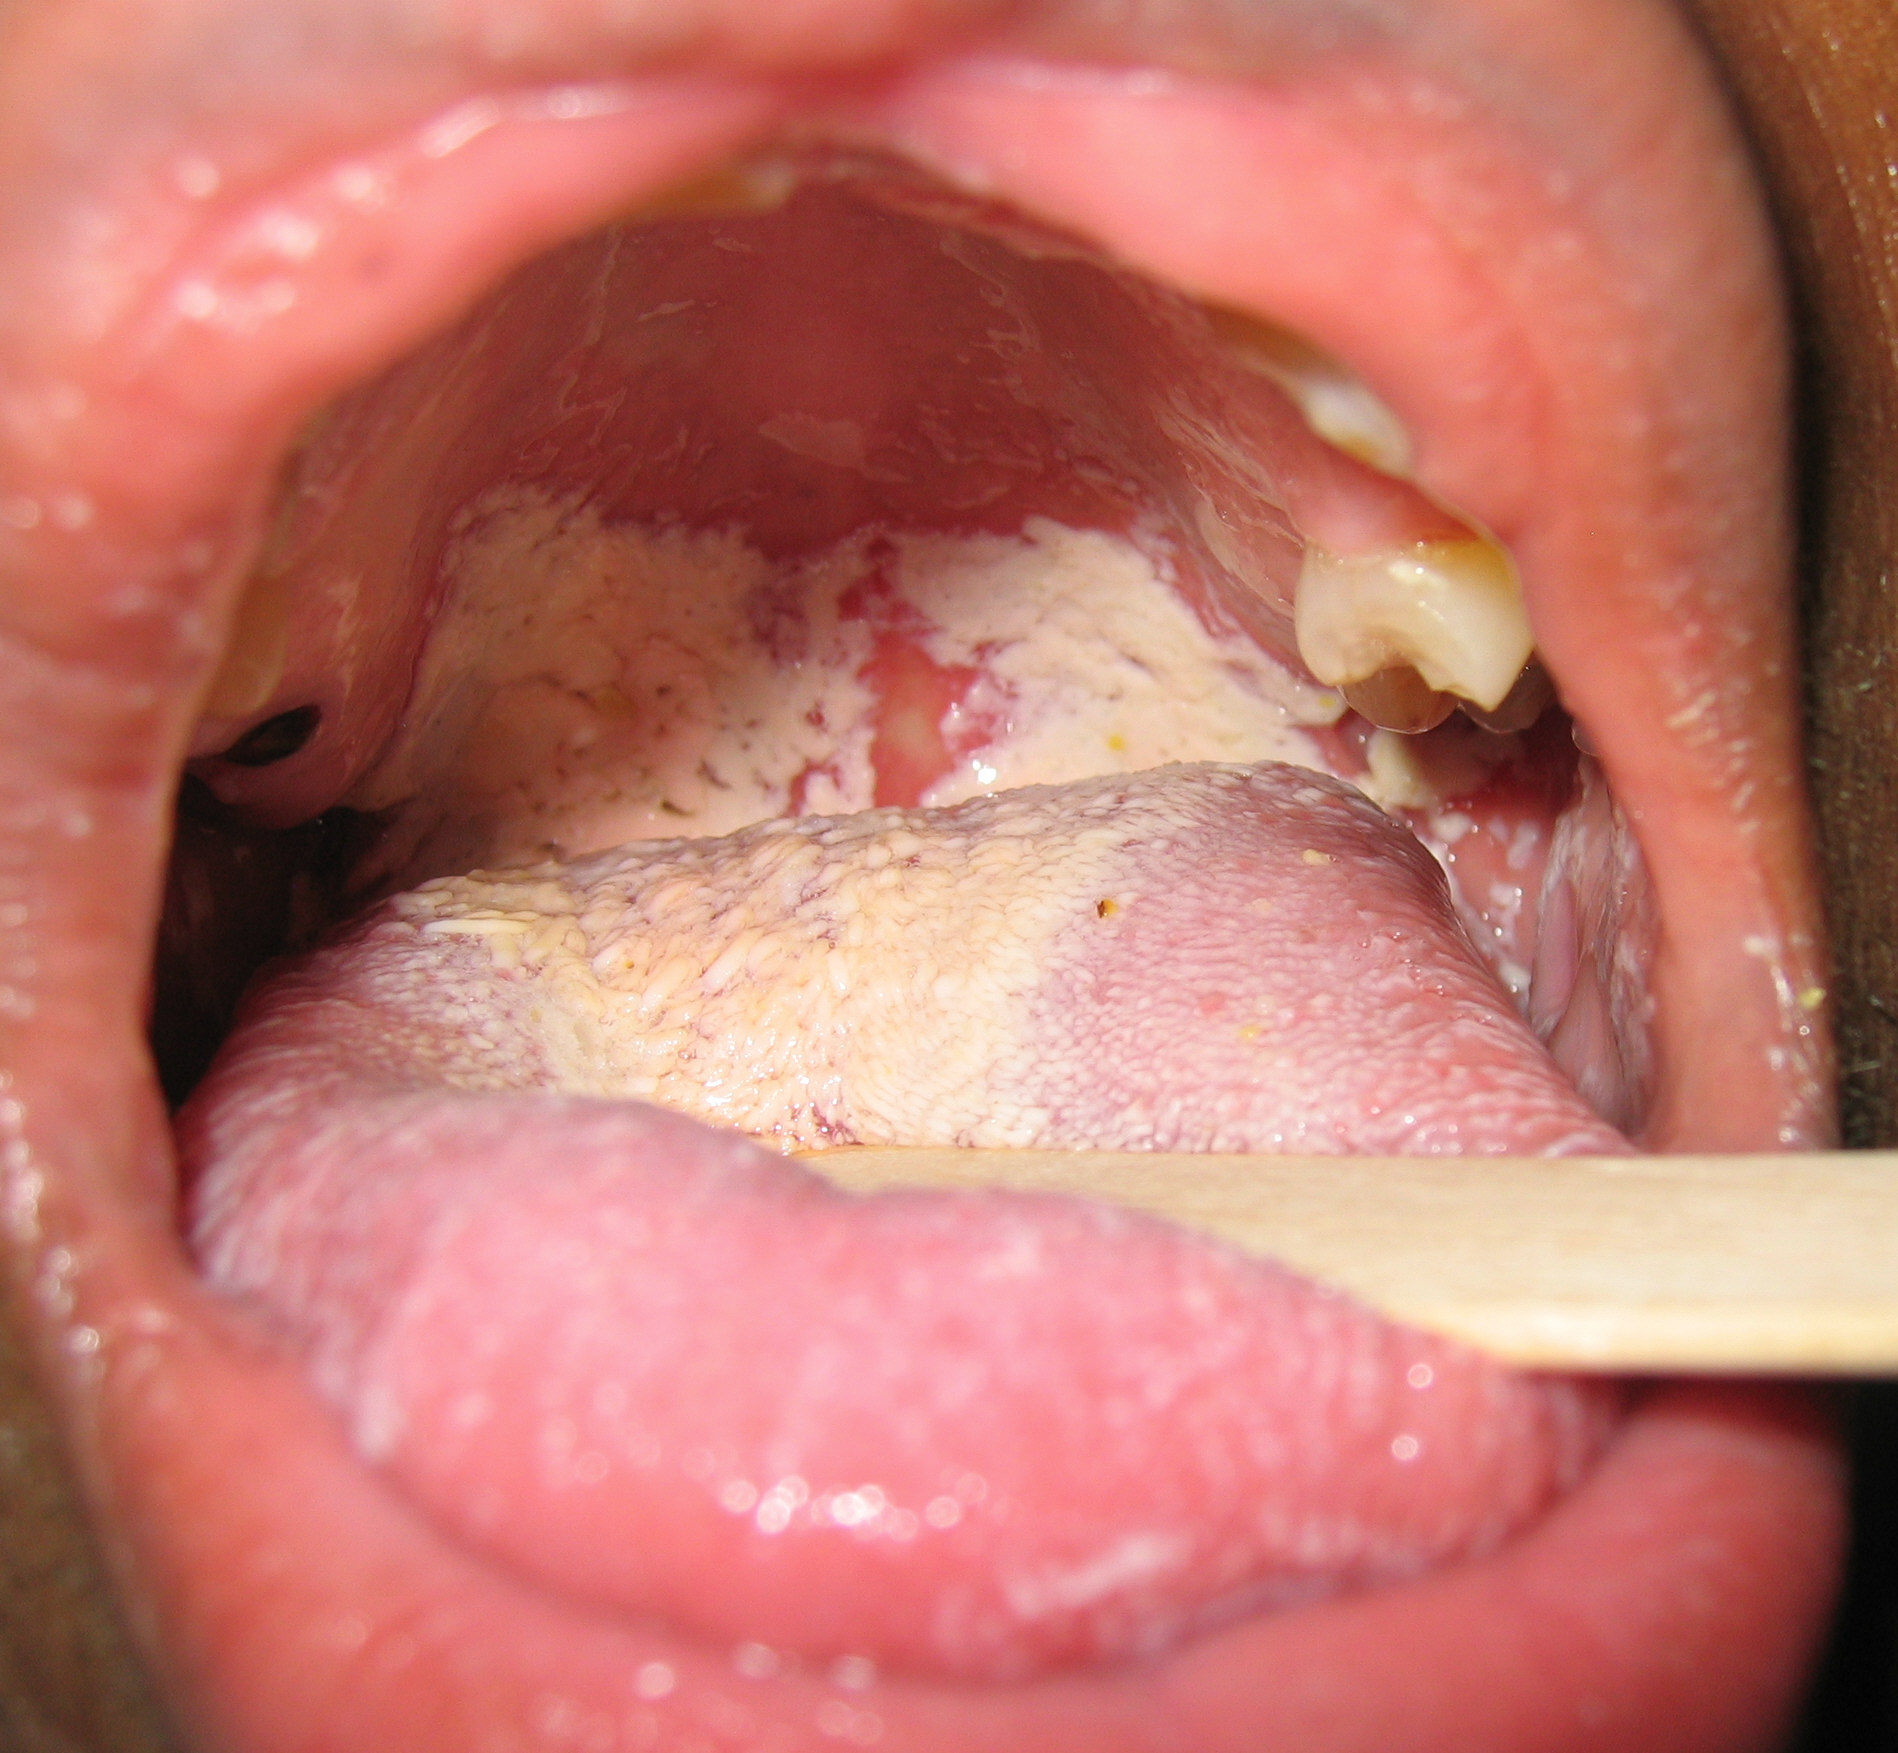 Oral candidiasis on the tongue and soft palate.